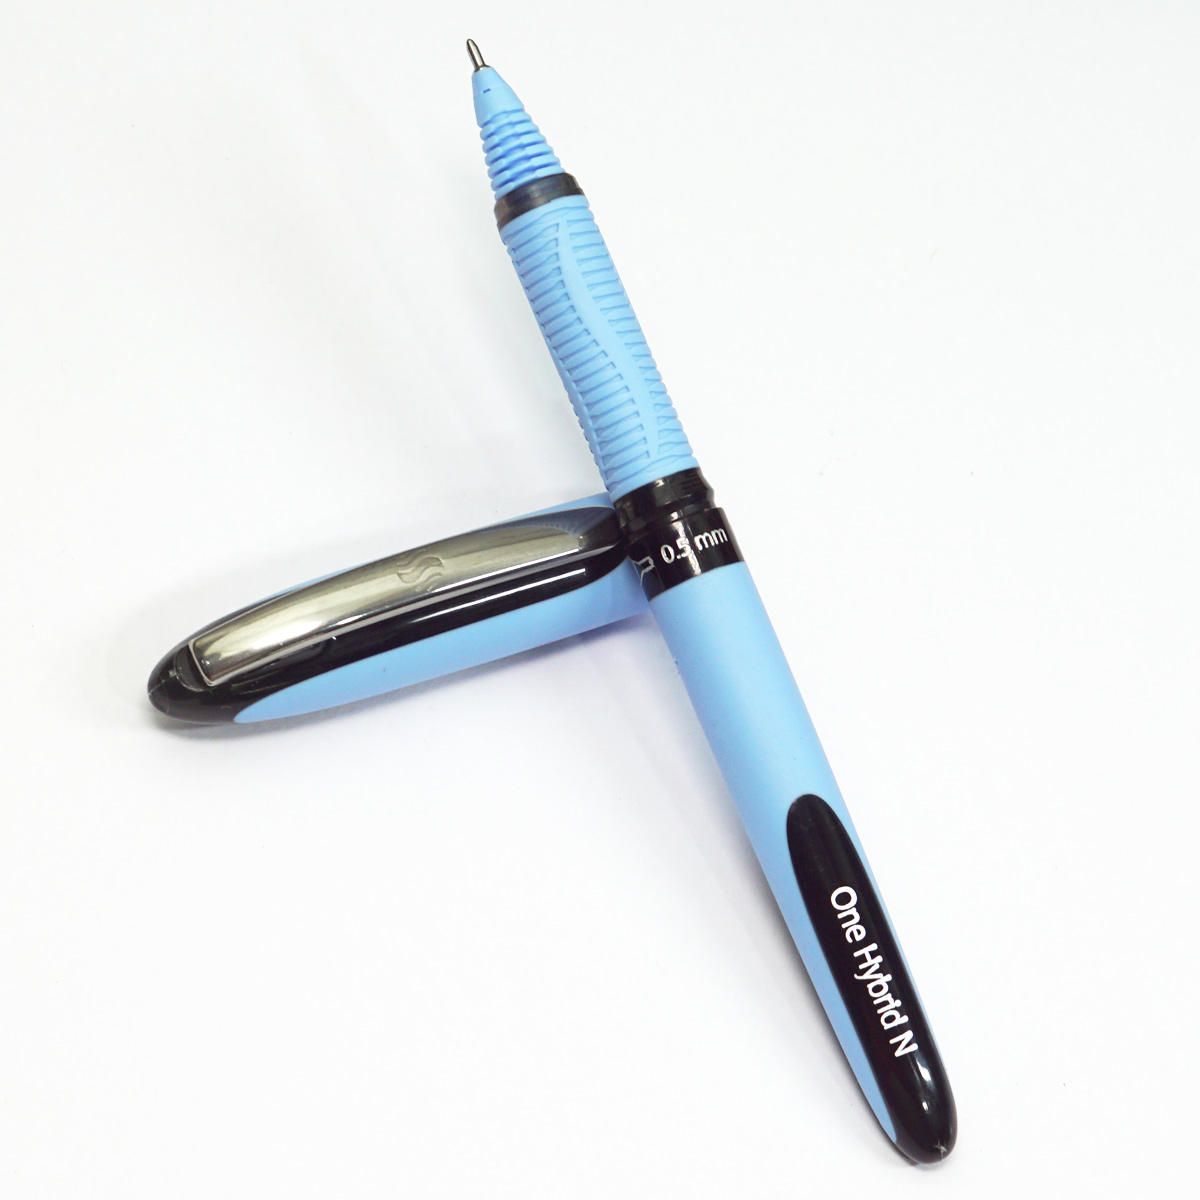 Schneider Blue Color Body With Silver Clip 0.5mm Needle Tip Black Writing Rollerball Pen SKU 23295